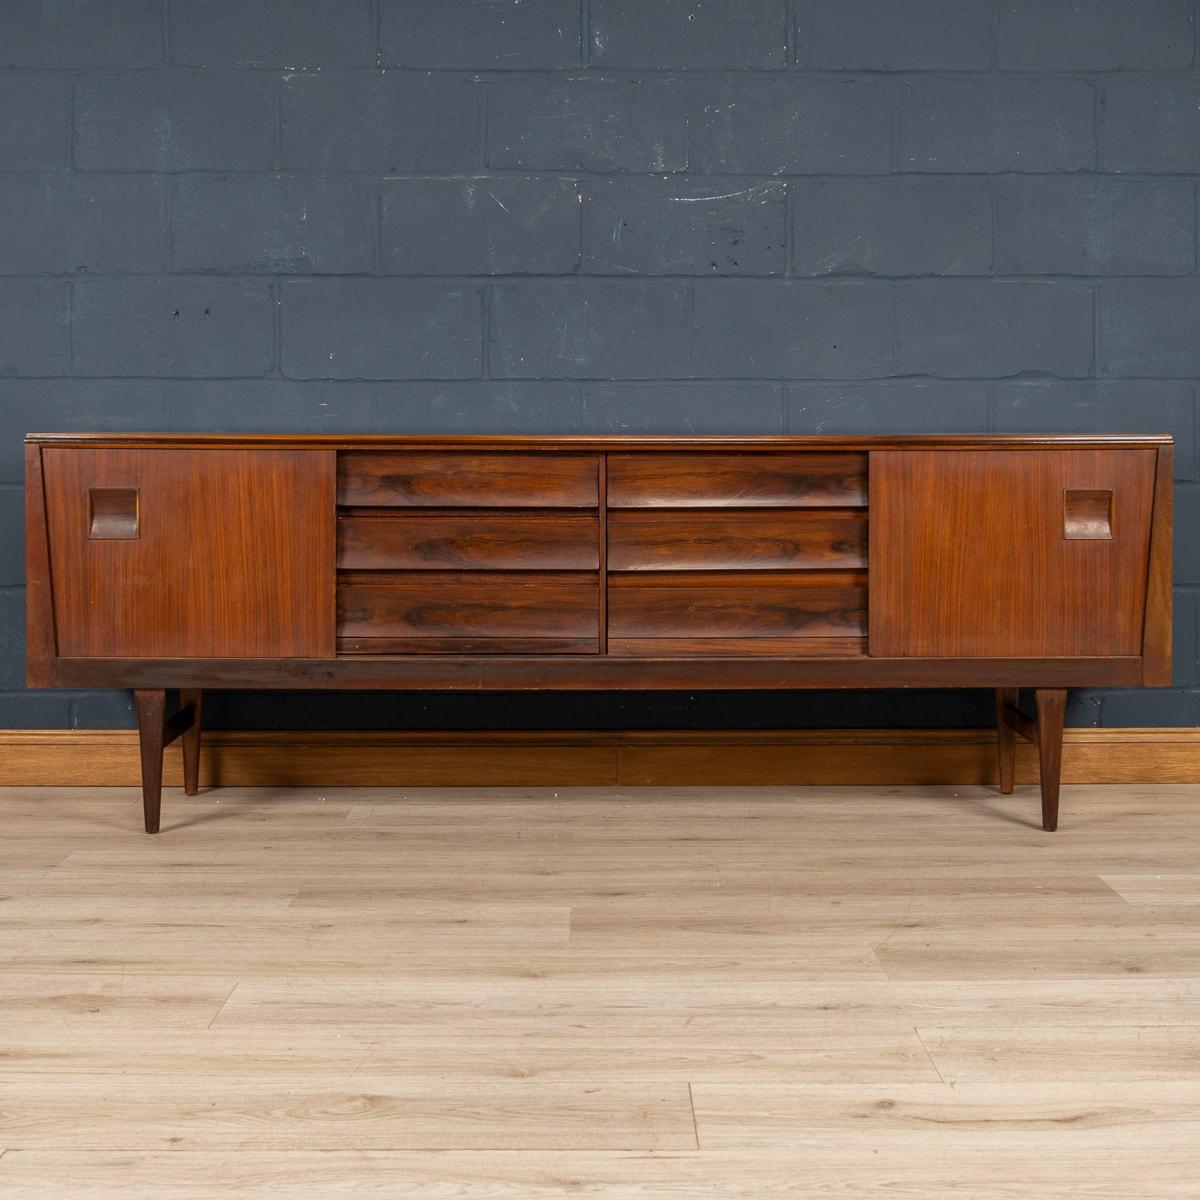 A wonderful and very rare mid century sideboard, made in England around the 1960s. The rarity is in the detail and it shows British cabinetmaking at its finest and most adventurous. The sideboard is made out of two types of wood: Brazilian rosewood